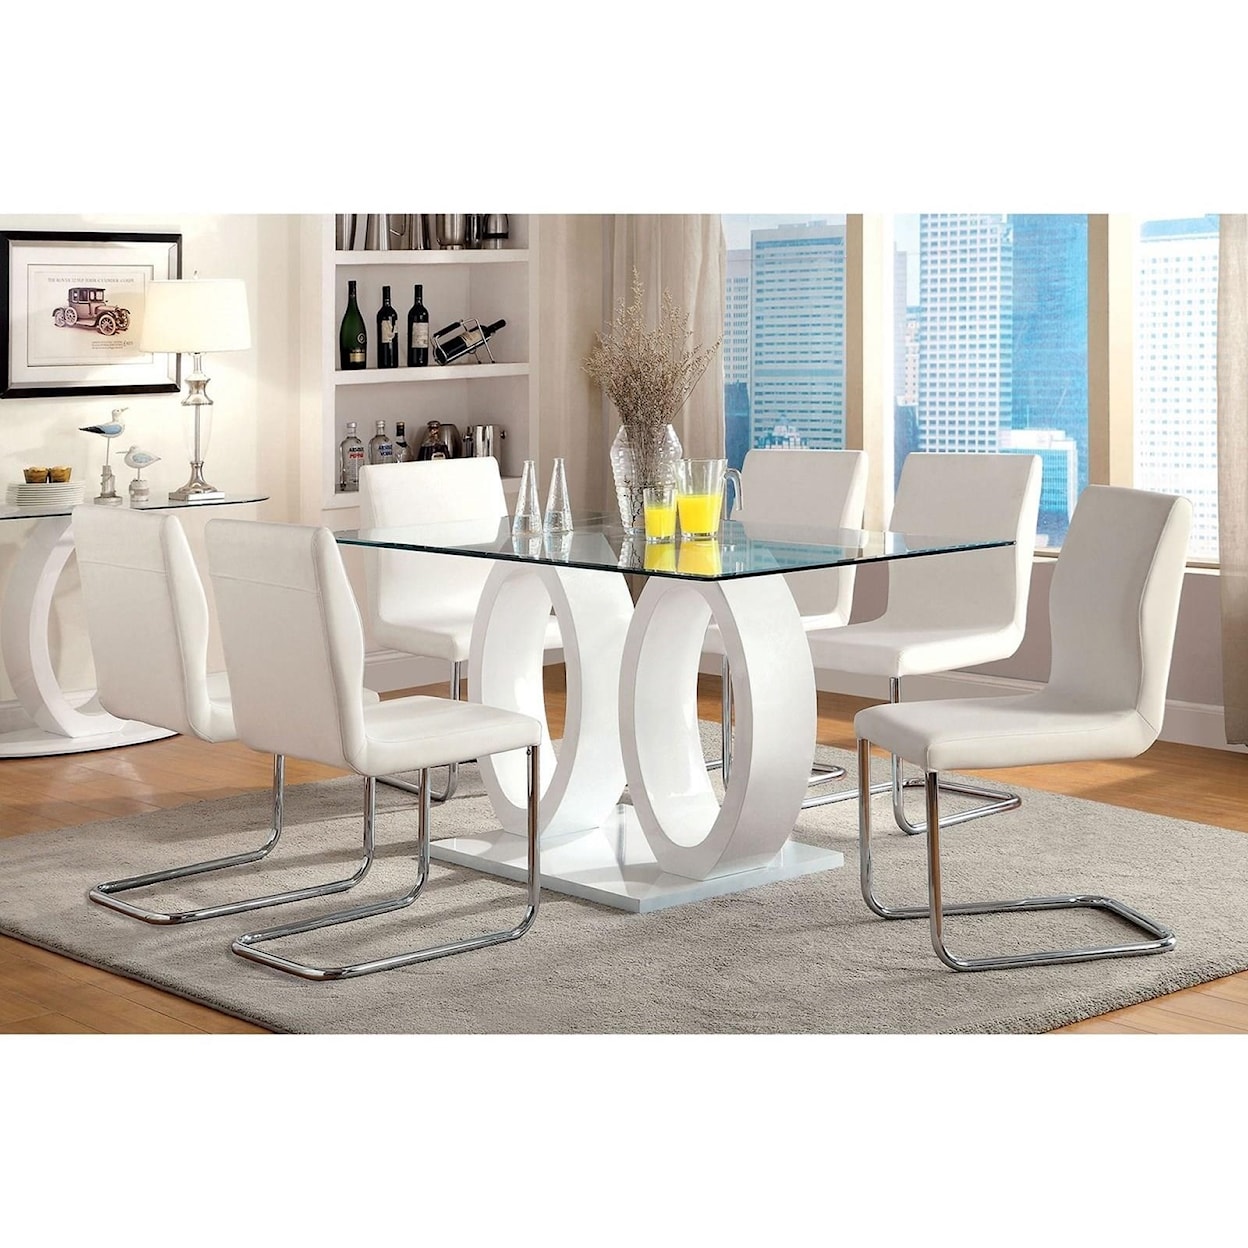 Furniture of America Lodia I Table and 6 Side Chairs